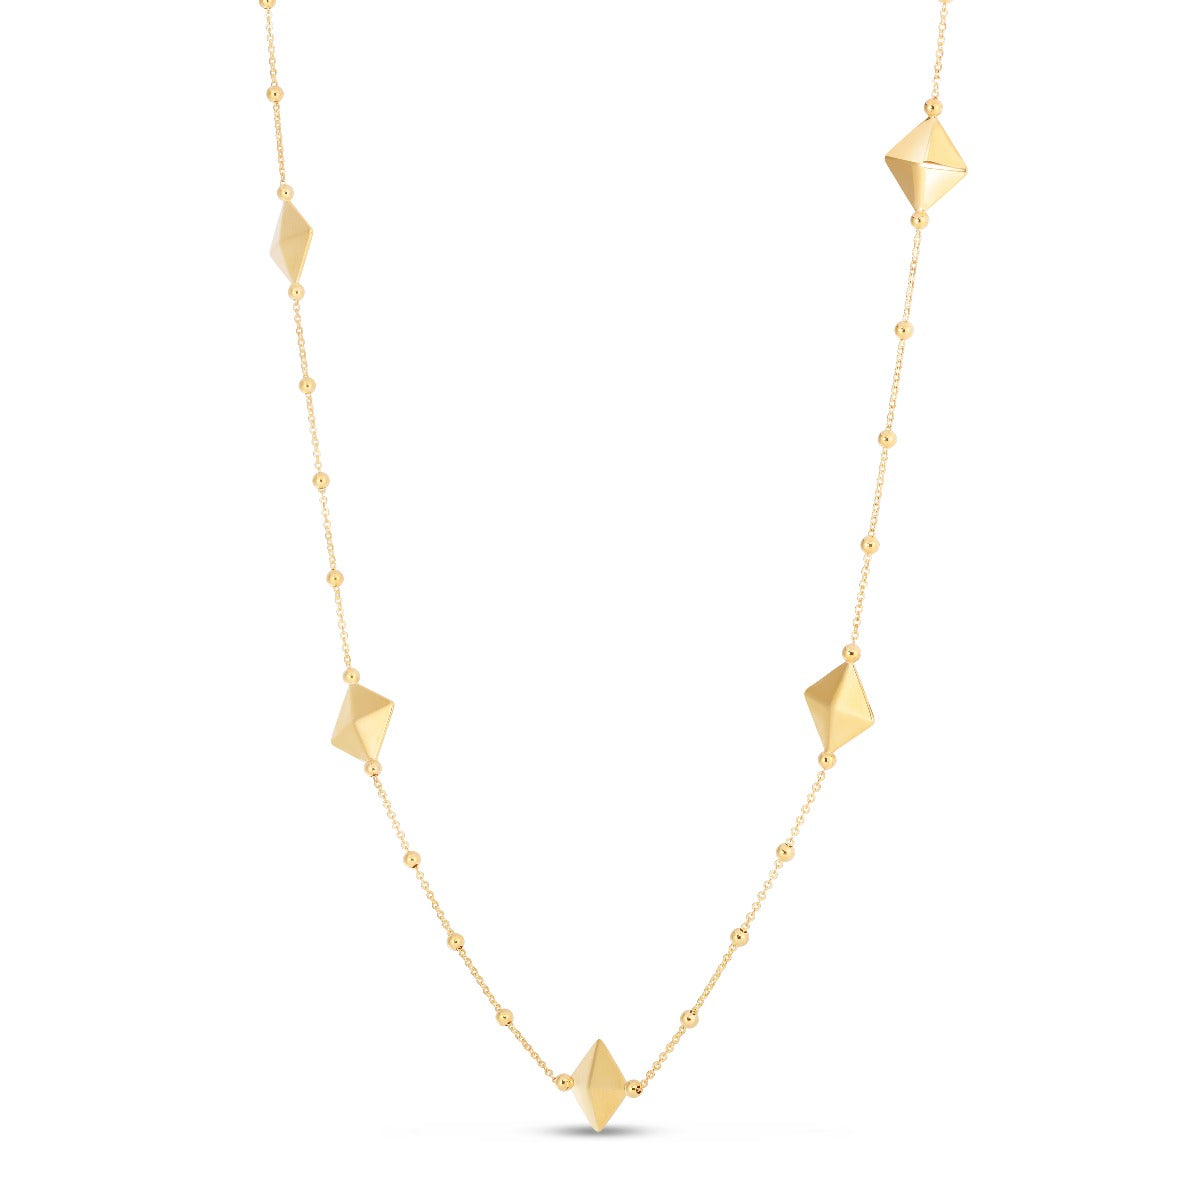 14K Gold Pyramid Station Necklace with Lobster Clasp